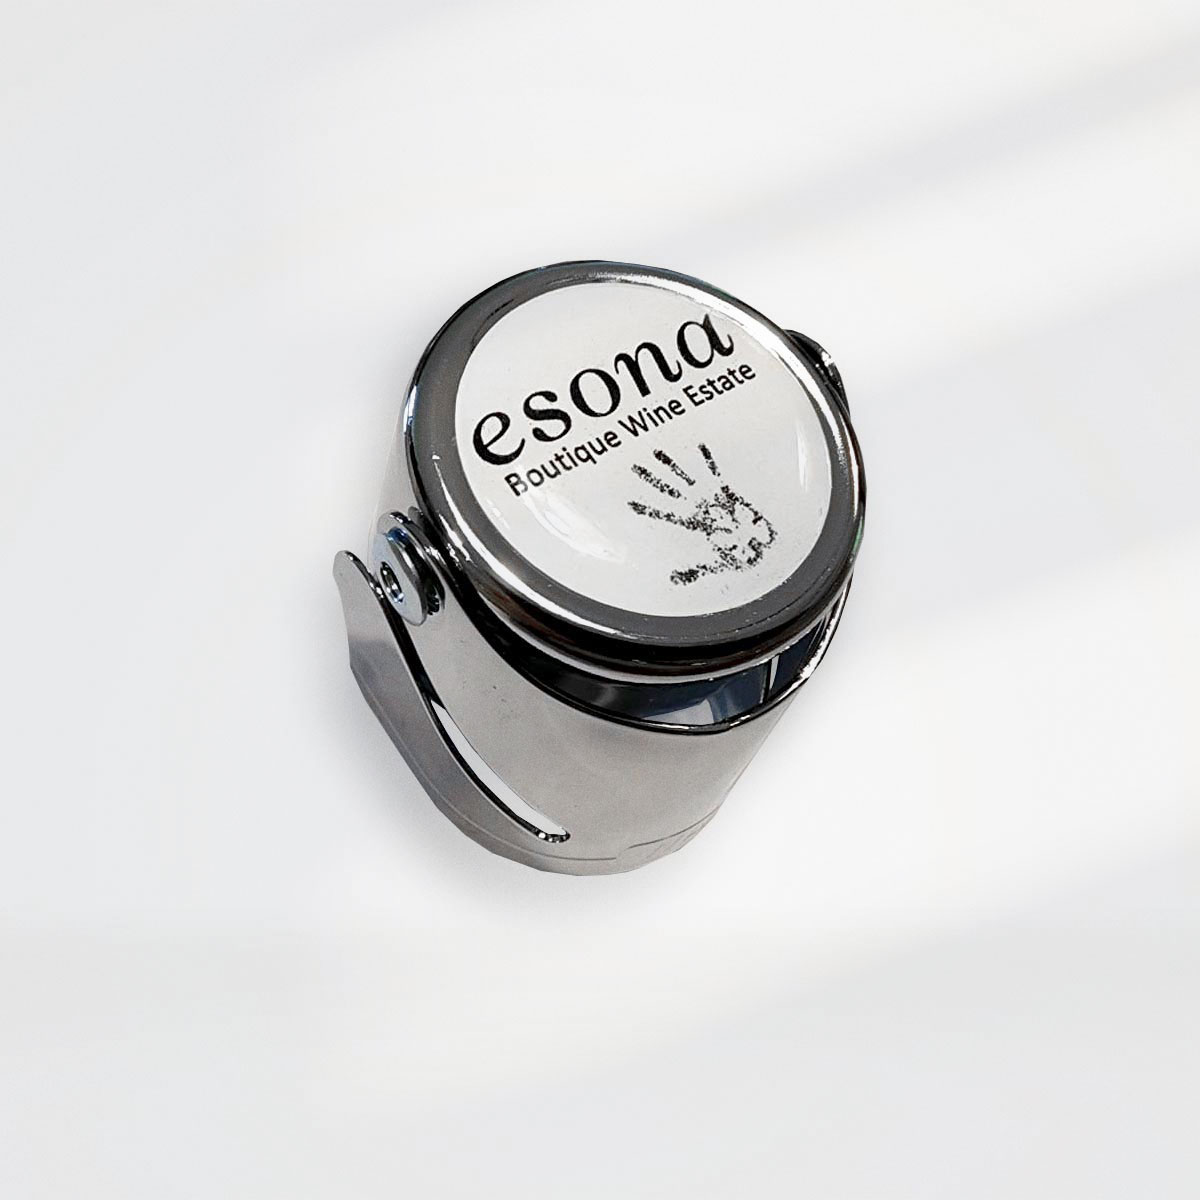 Esona Our Flower Collection Methode Cap Classique Sparkling Wine South Africa Limited Edition Stopper